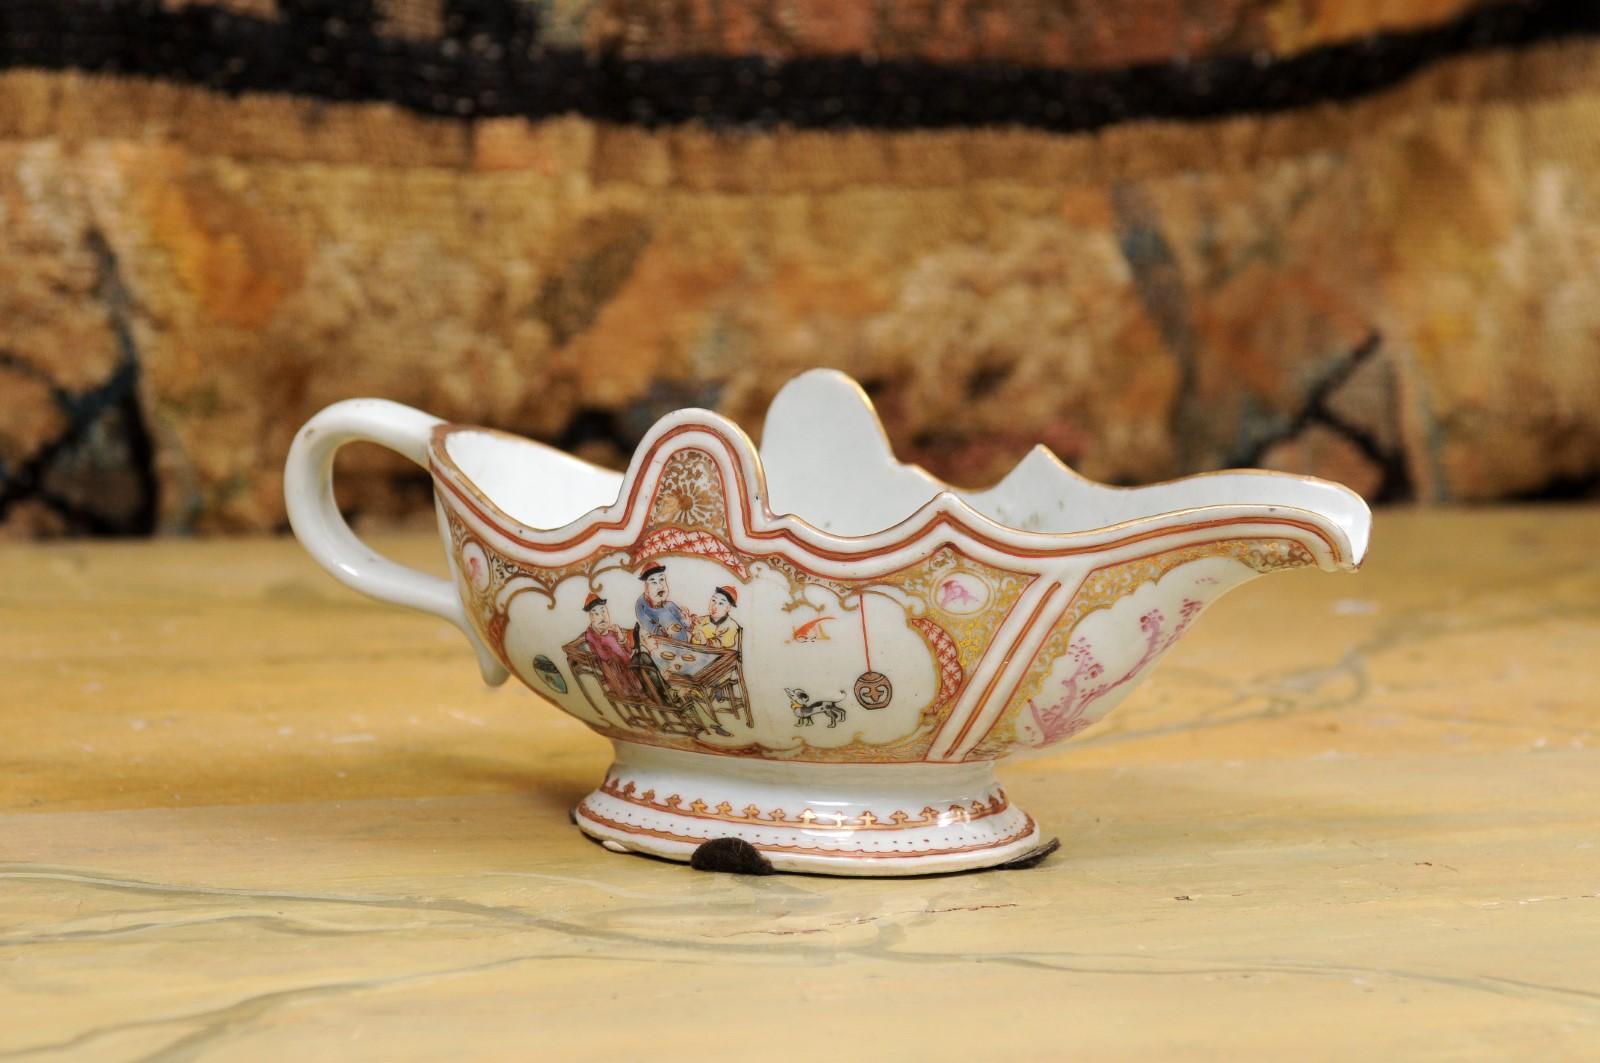  Late 18th Century Chinese Export Porcelain Sauce Boat For Sale 8